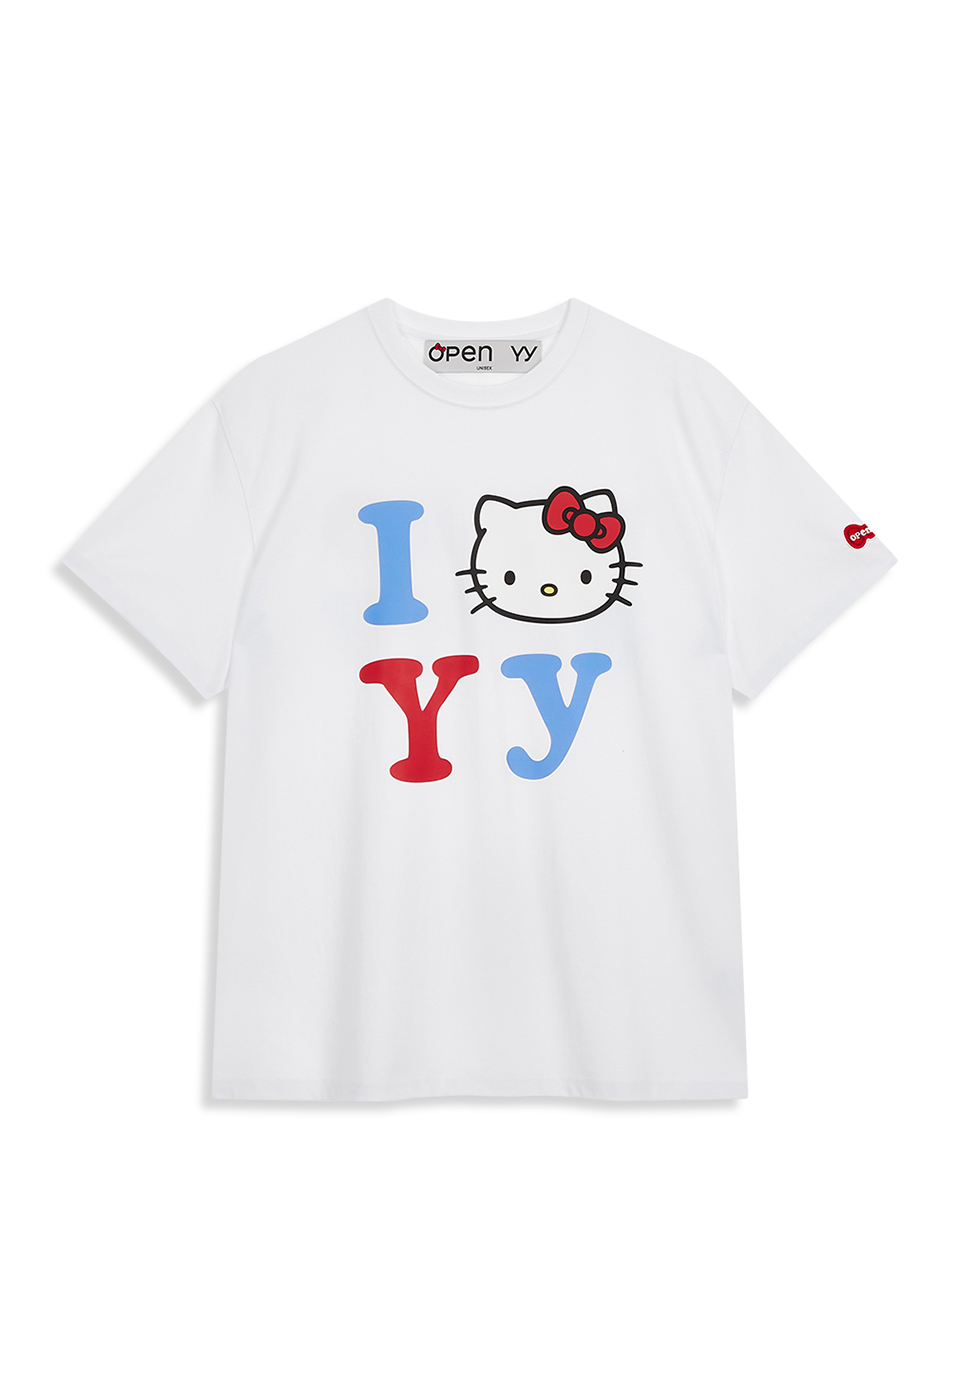 [6/7 DELIVERY] HELLO KITTY X YY T-SHIRT, WHITE